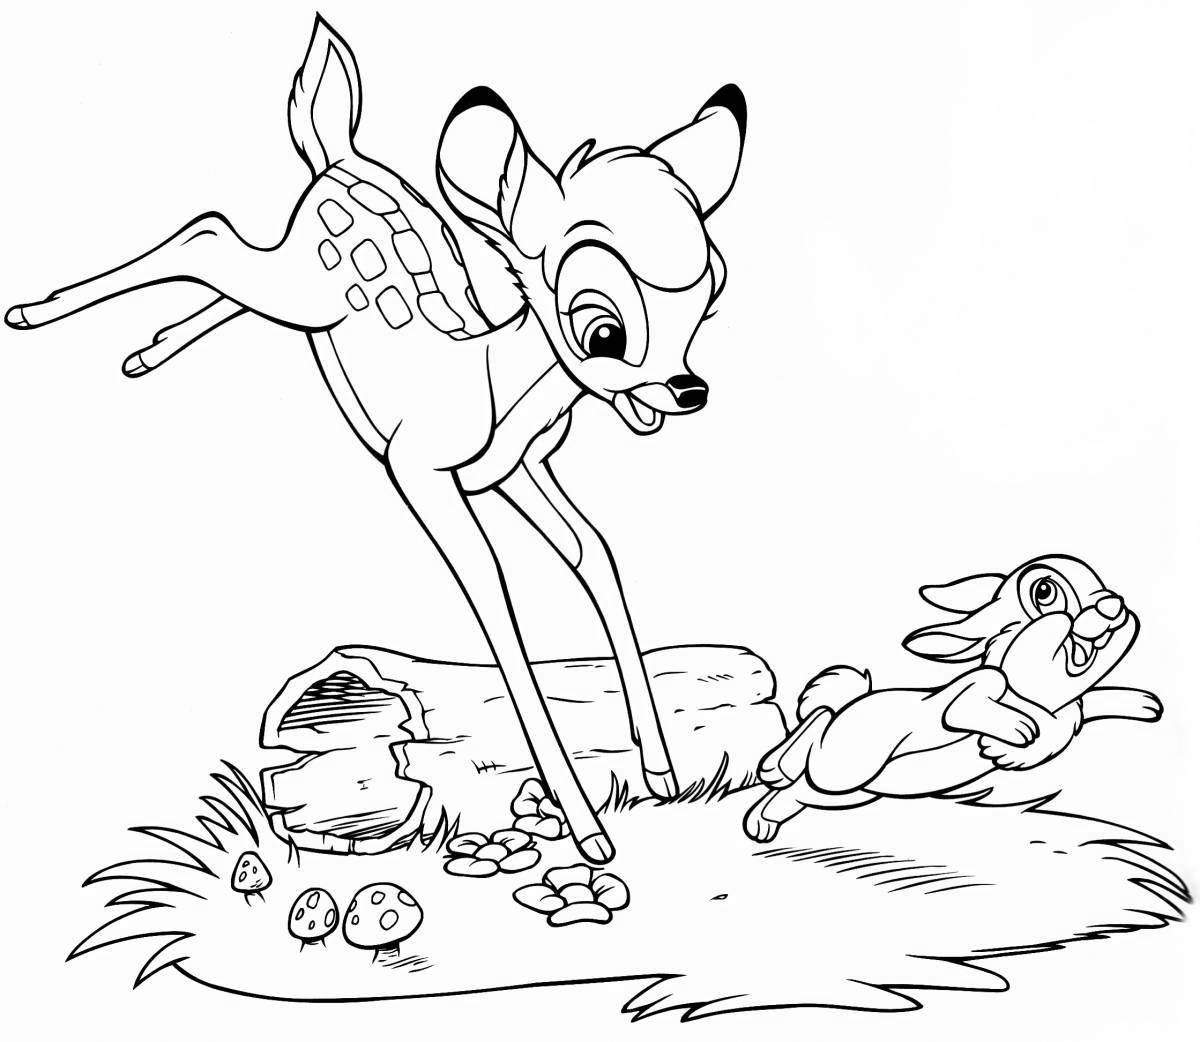 Playful bambi coloring for kids